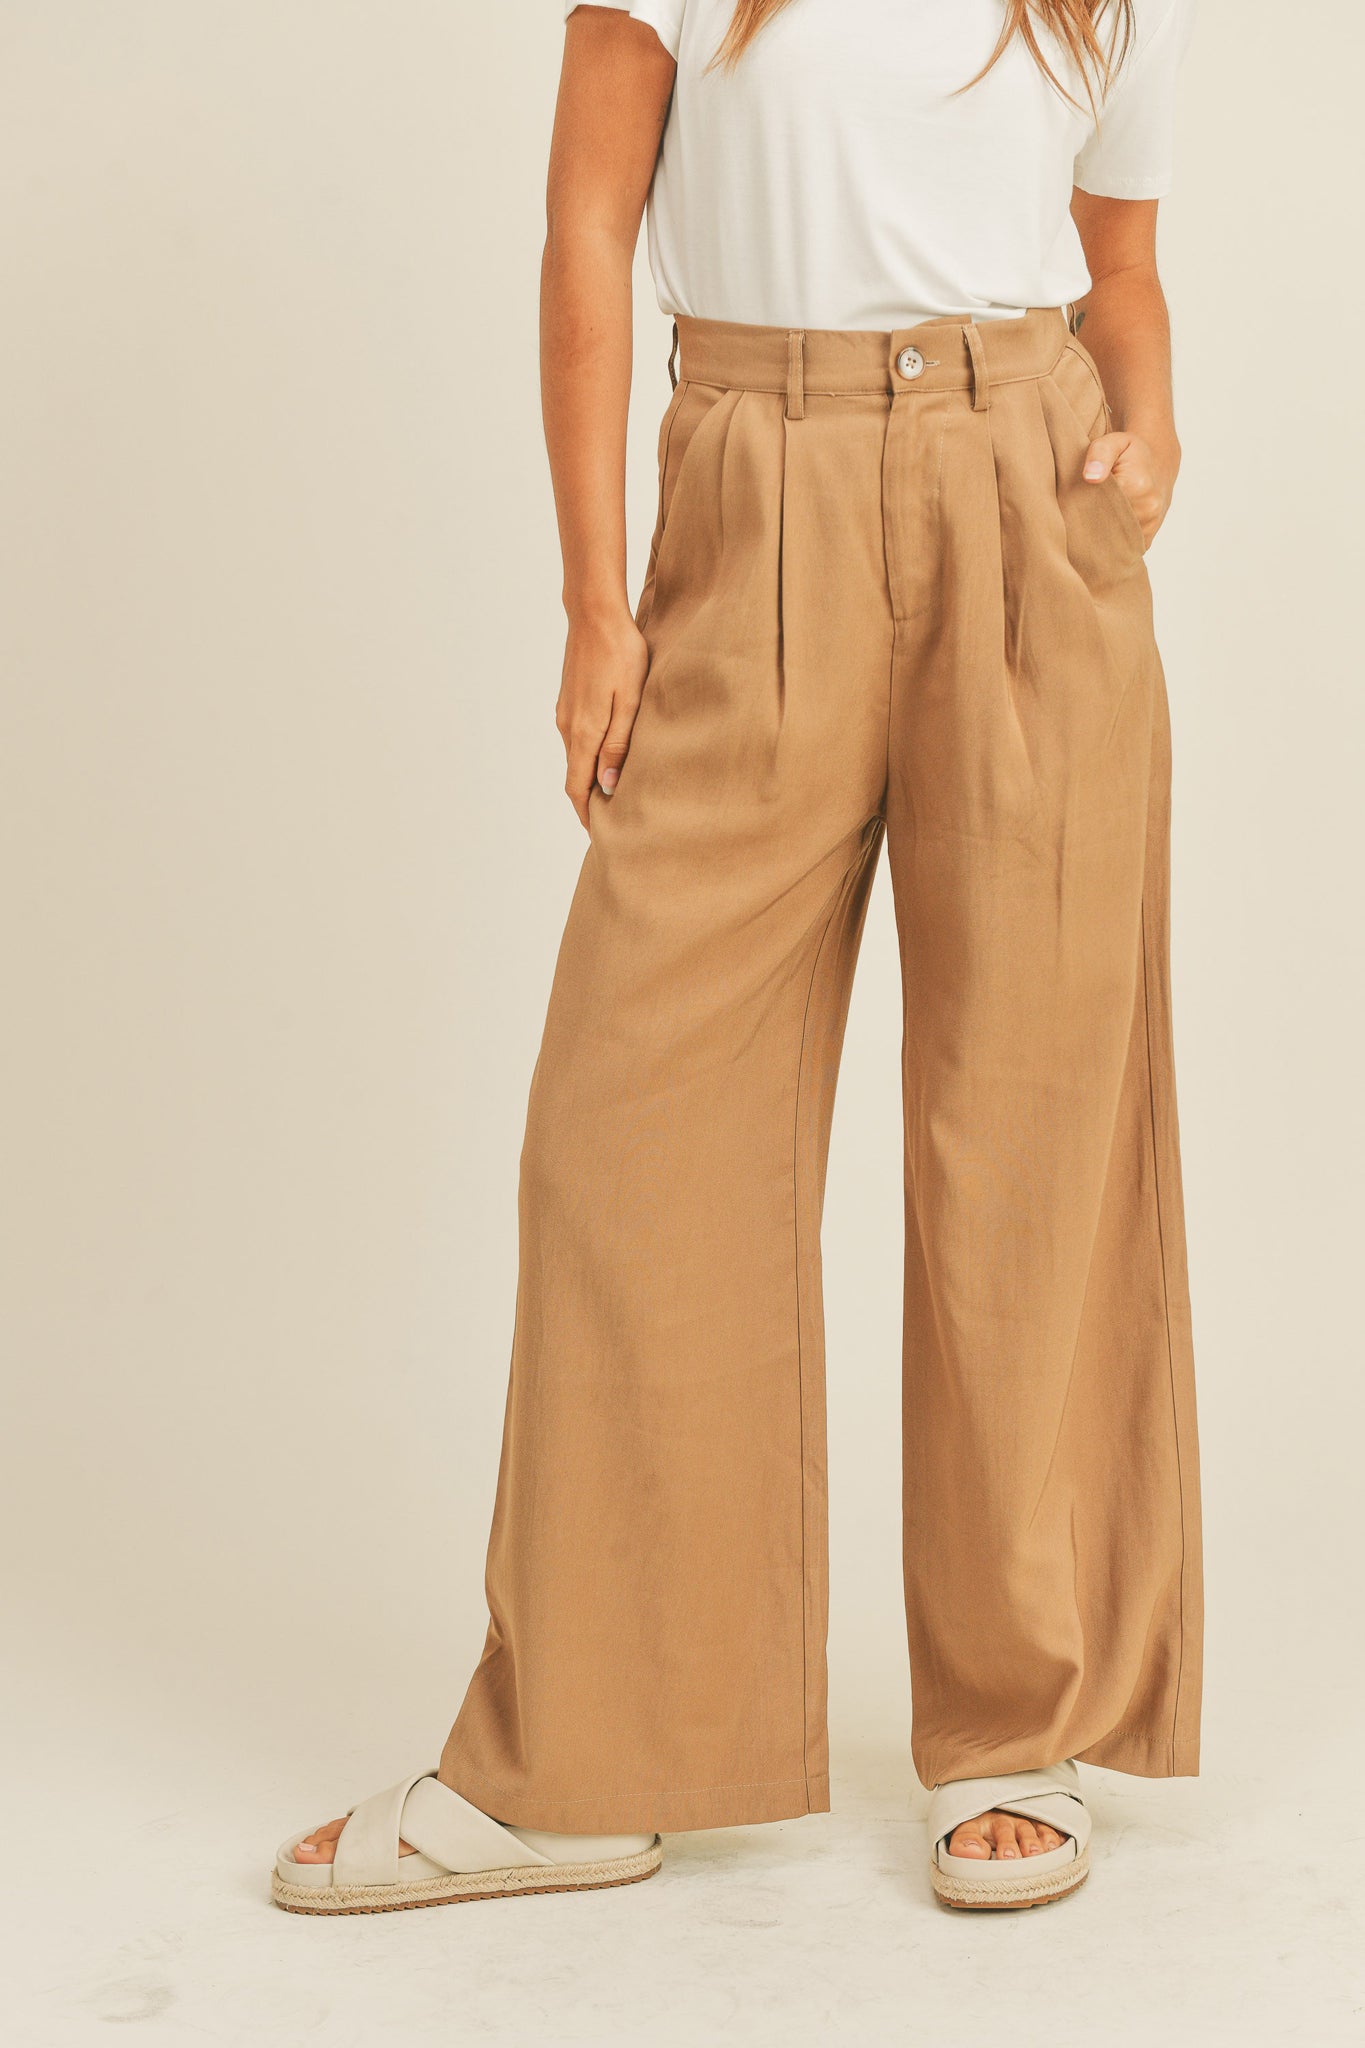 View 1 of Arid Trousers in Camel, a Pants from Larrea Cove. Detail: 
Introducing our Arid Trousers - the perfect pant for ...